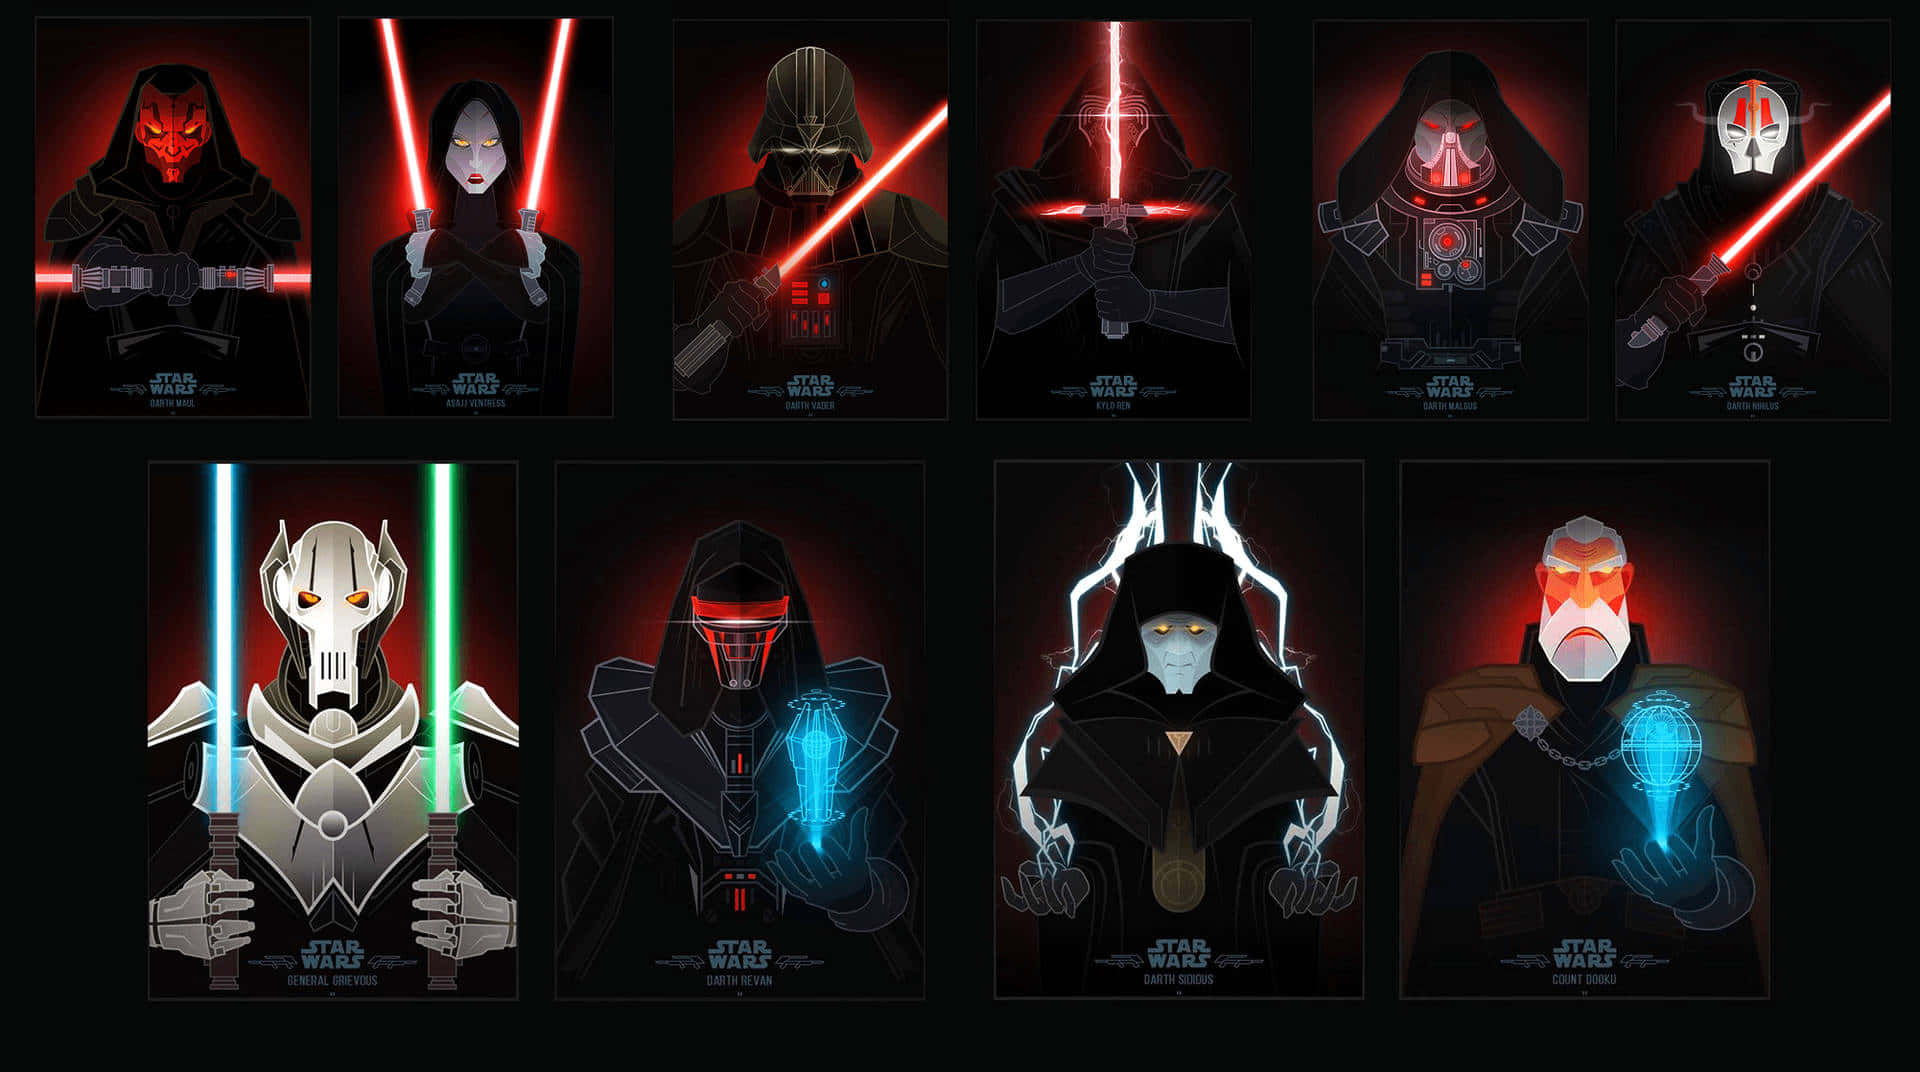 The power of the dark side is strong." Wallpaper